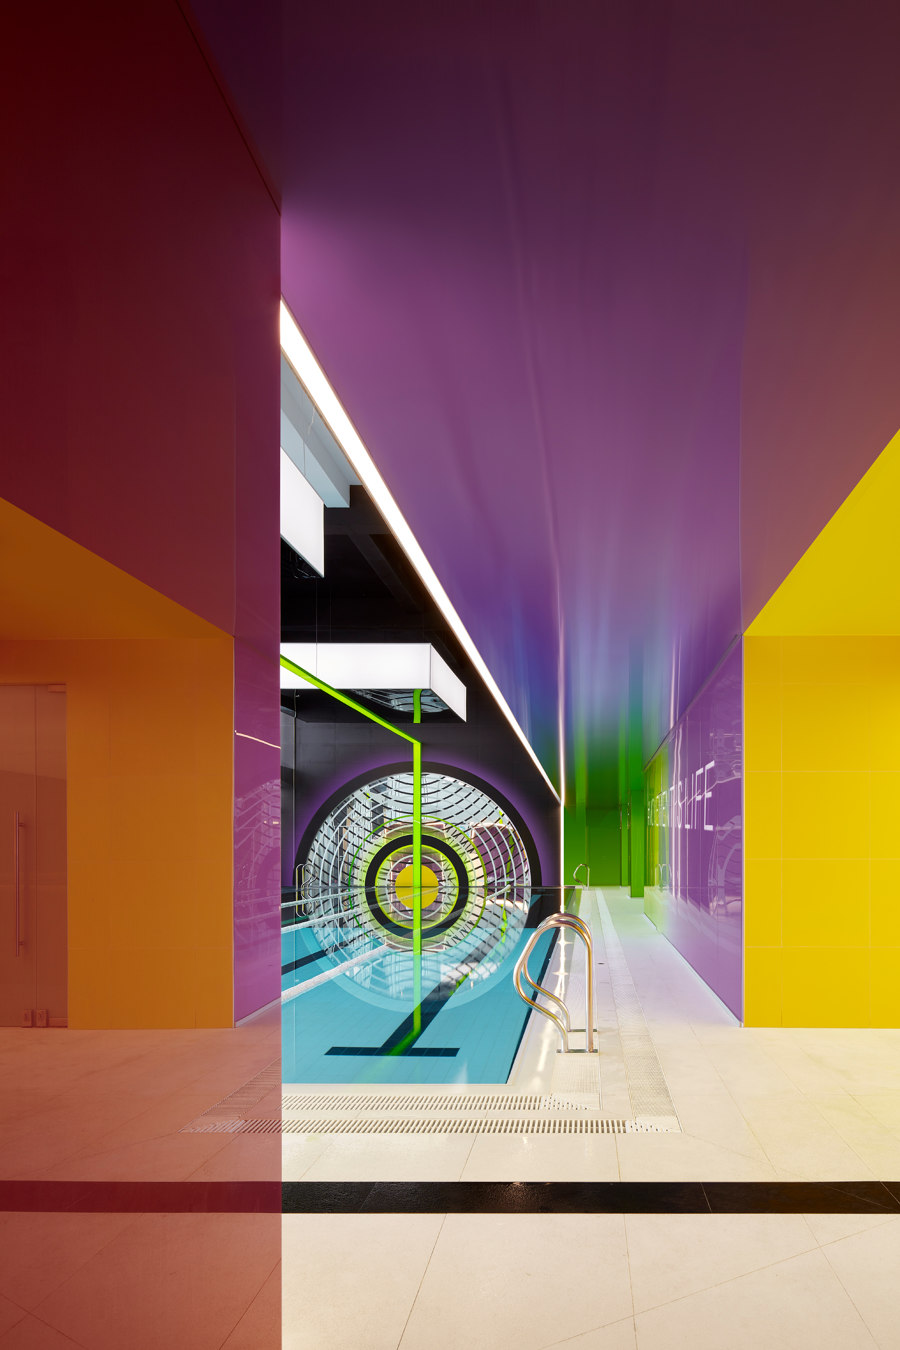 Sports Club X-FIT // Transformation miracles by VOX Architects | Spa facilities